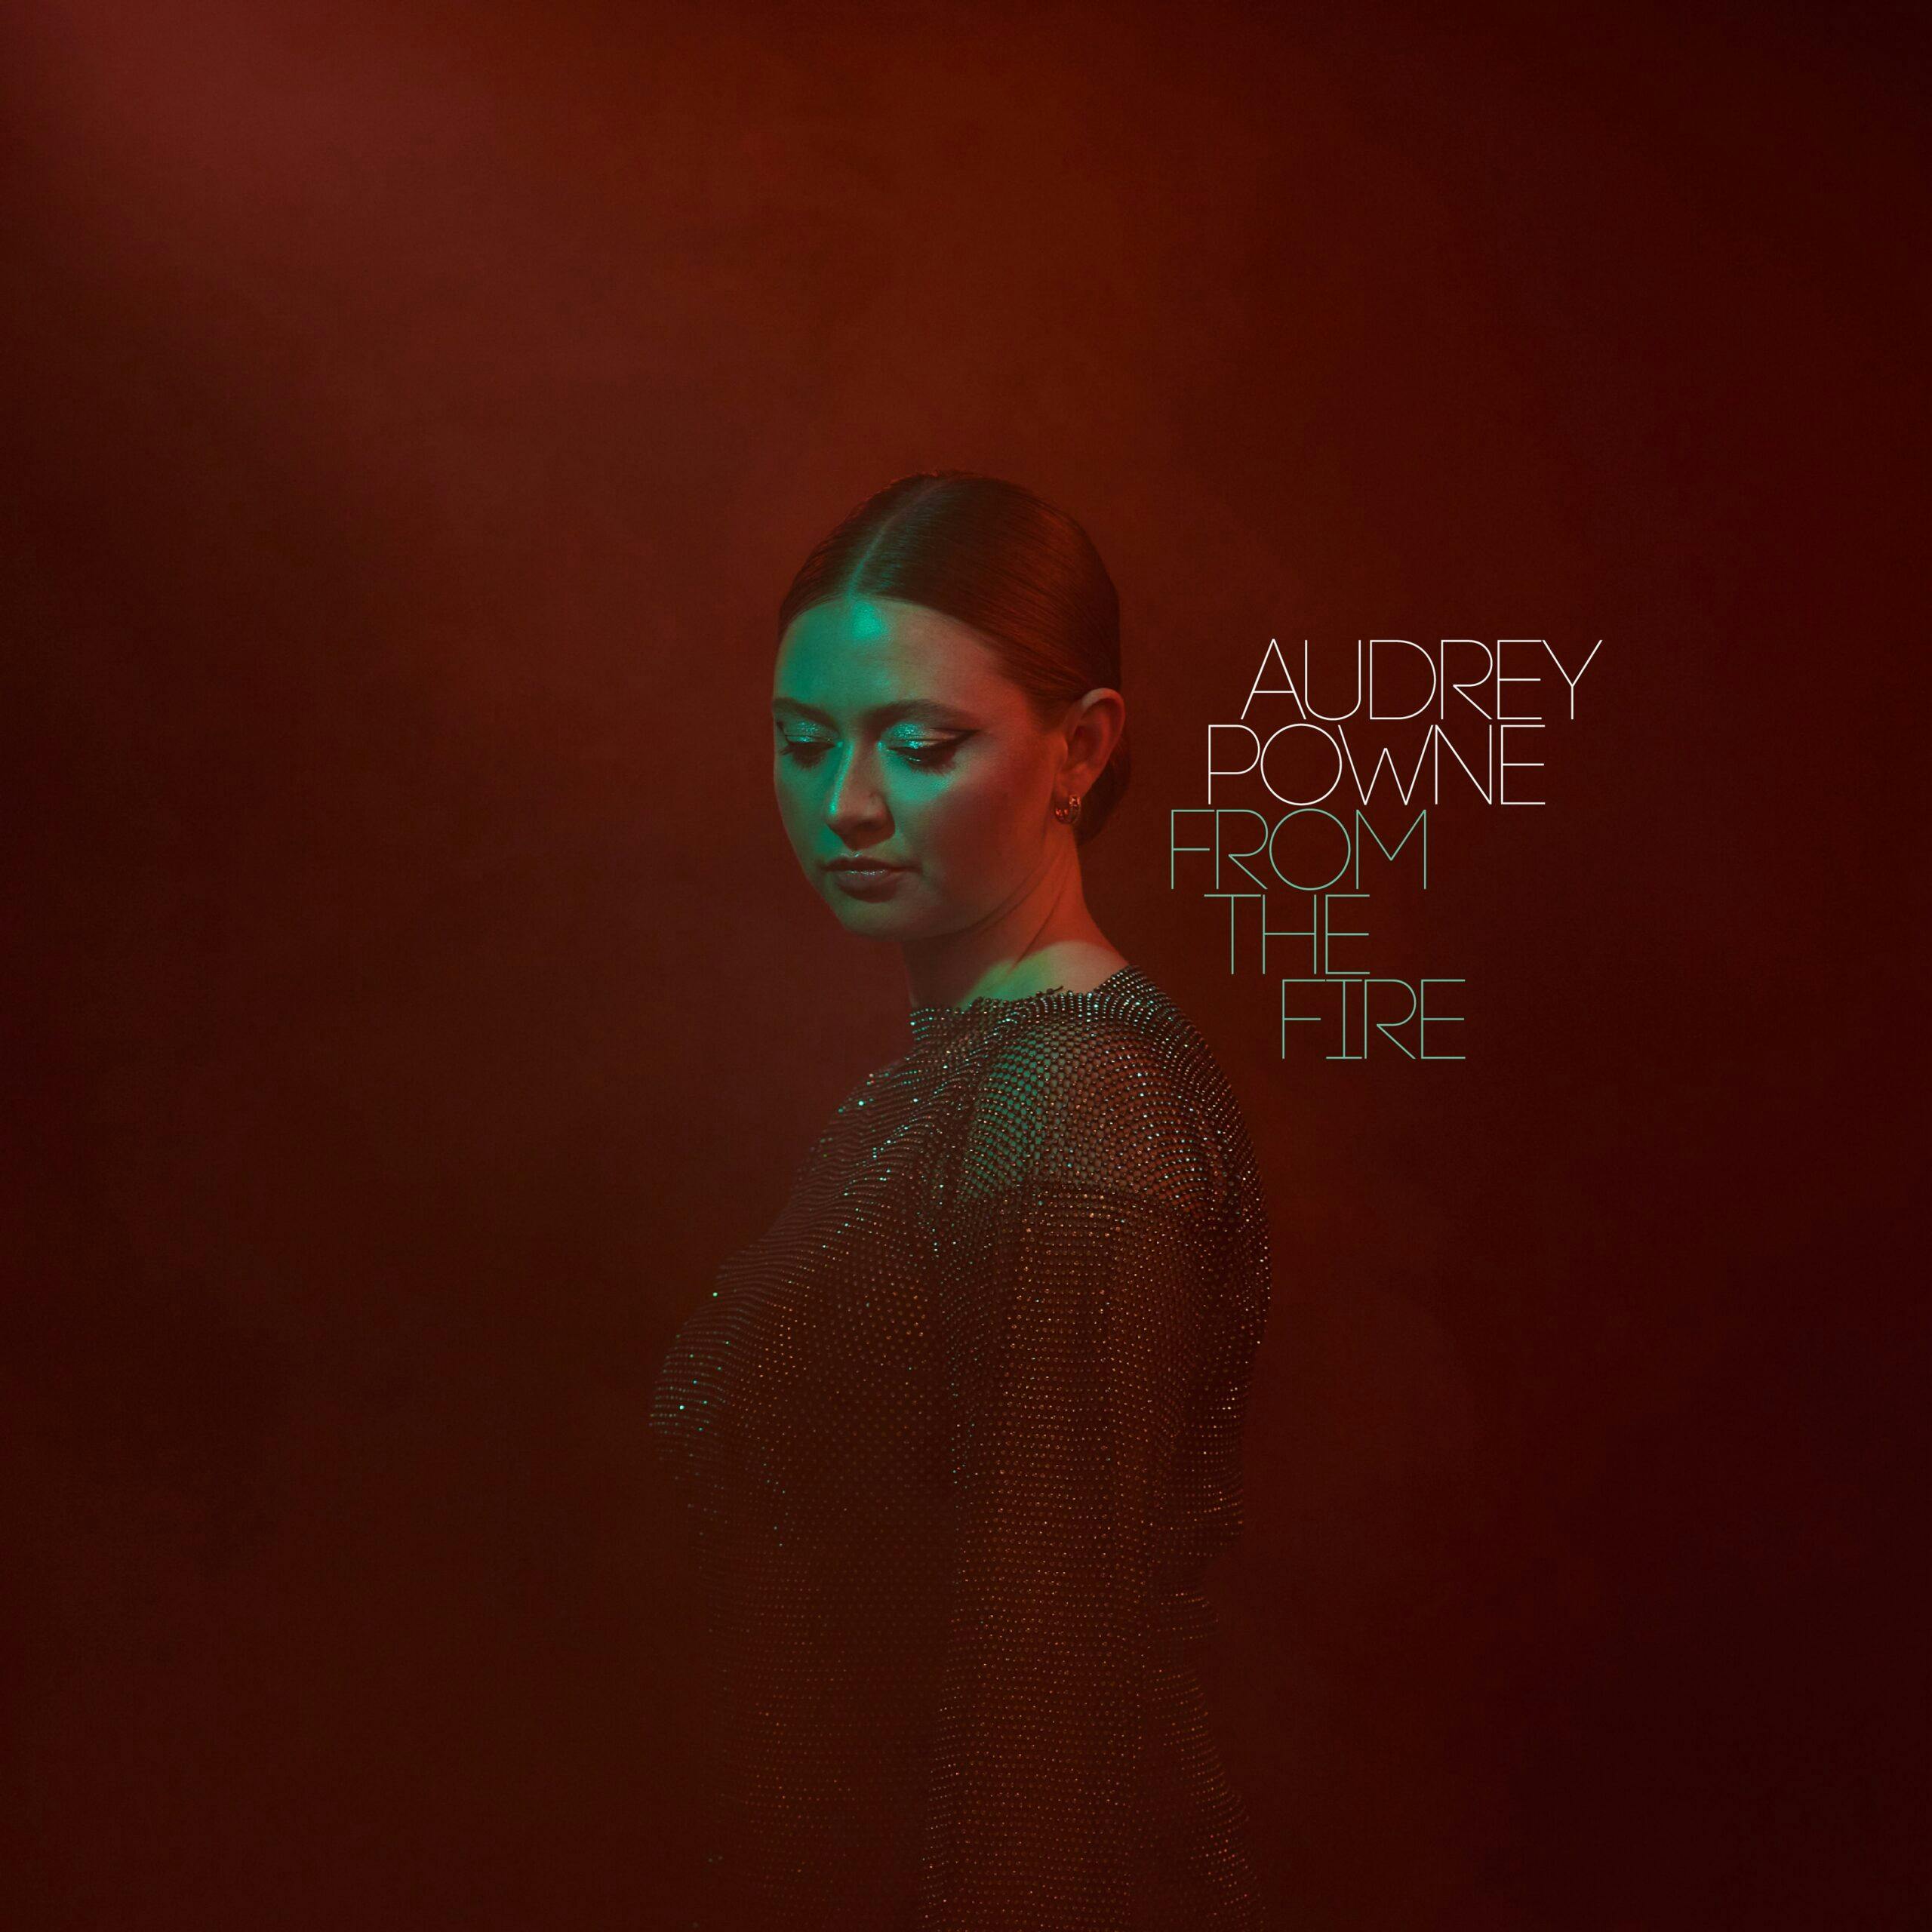 udrey Powne's stunning debut album, From The Fire, is set to be one of those must have LPs in any music lover's collection. Something of an auteur release it features nine tracks all composed by Audrey, with all string arrangements and all produced by her.